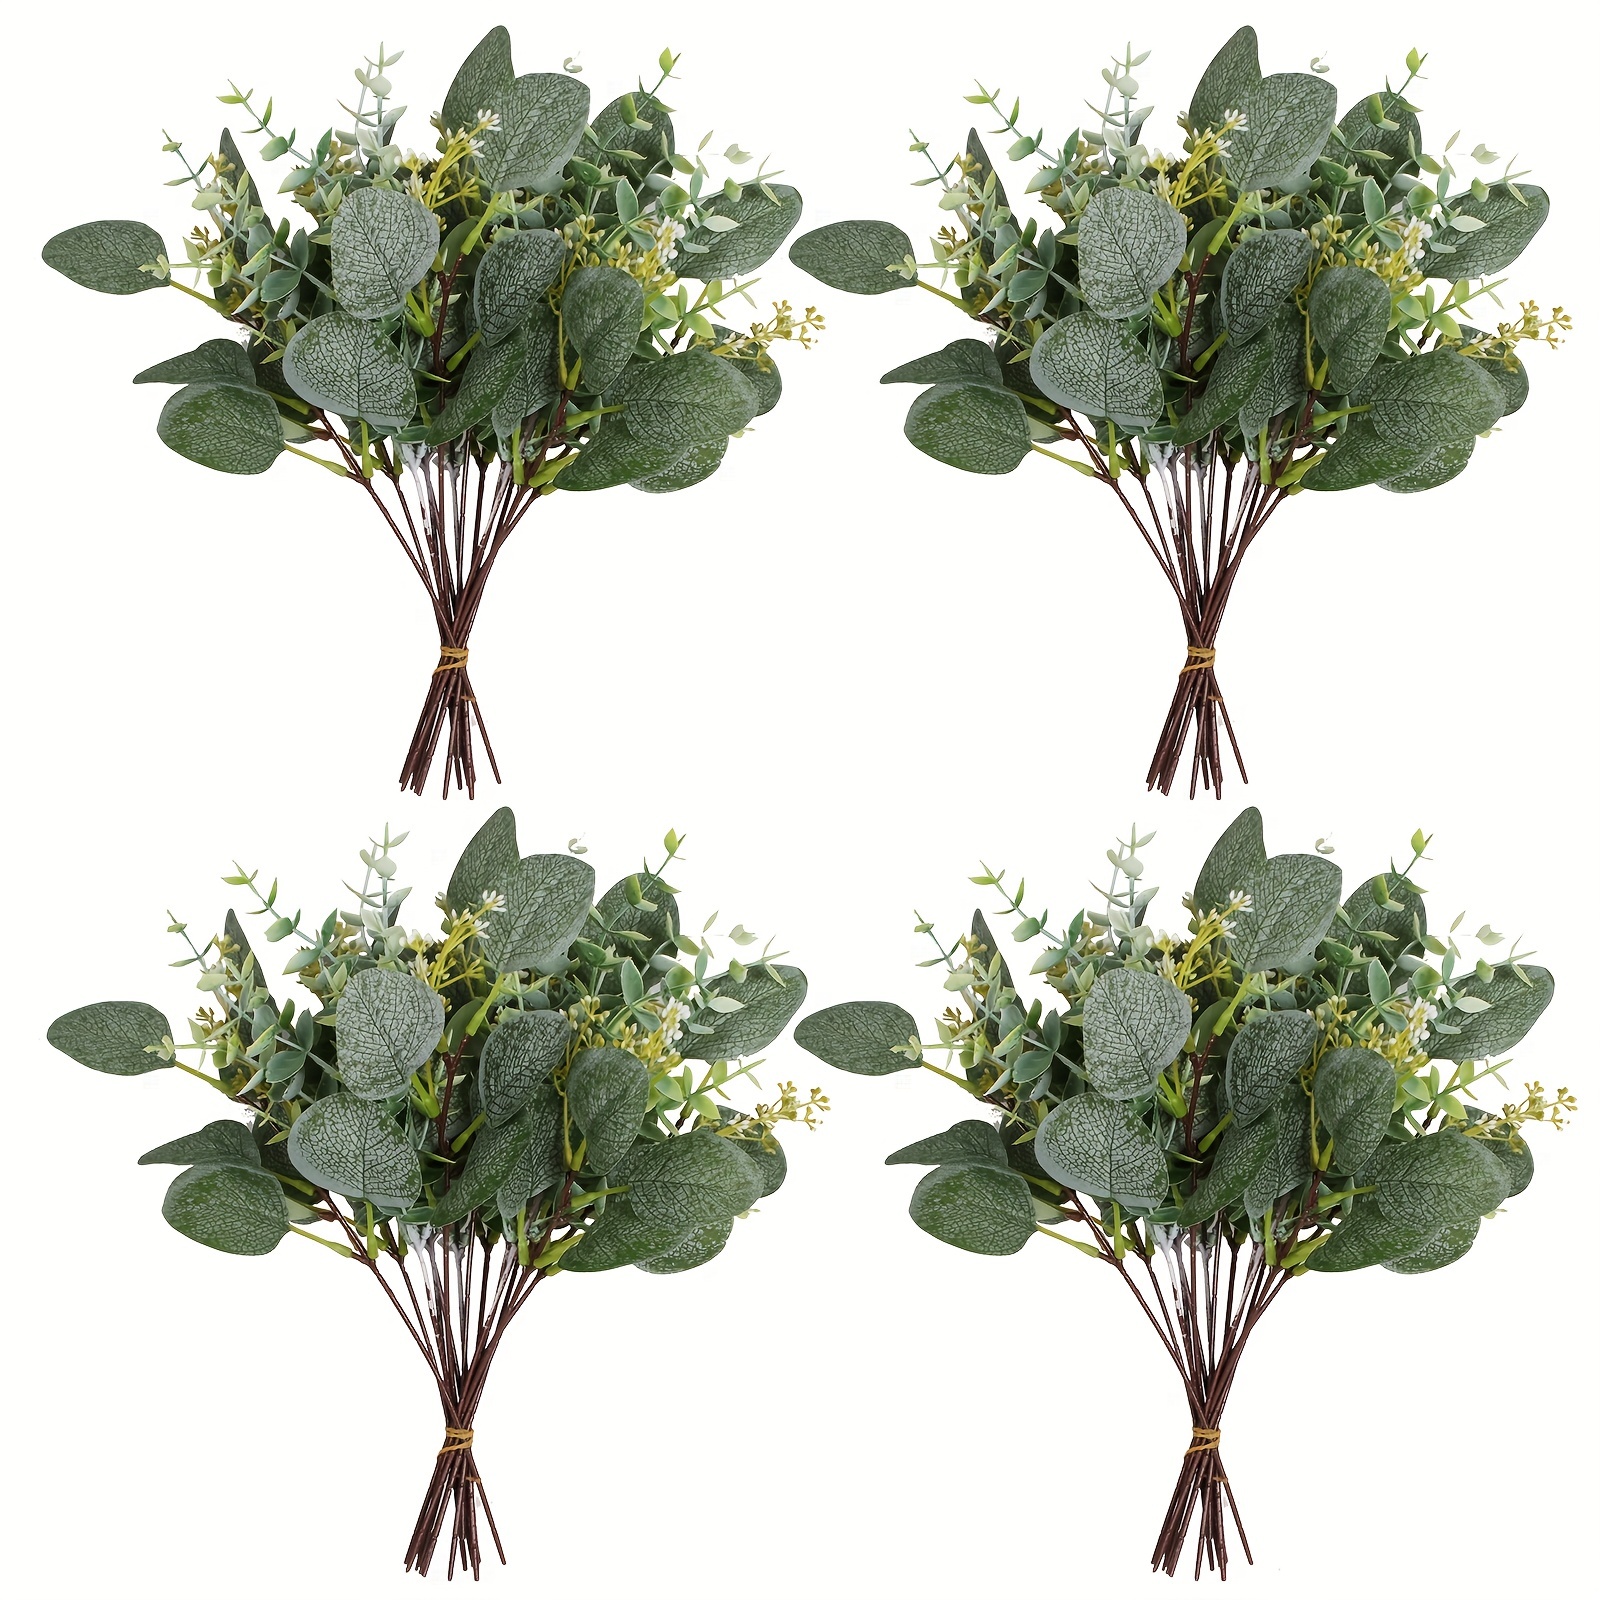 

20pcs Artificial Eucalyptus Leaf Stems, With White Seeds Greenery Plant Eucalyptus Leaves Fake Green Leaf Branches, For Wedding Bouquet Home Room Garden Decorations